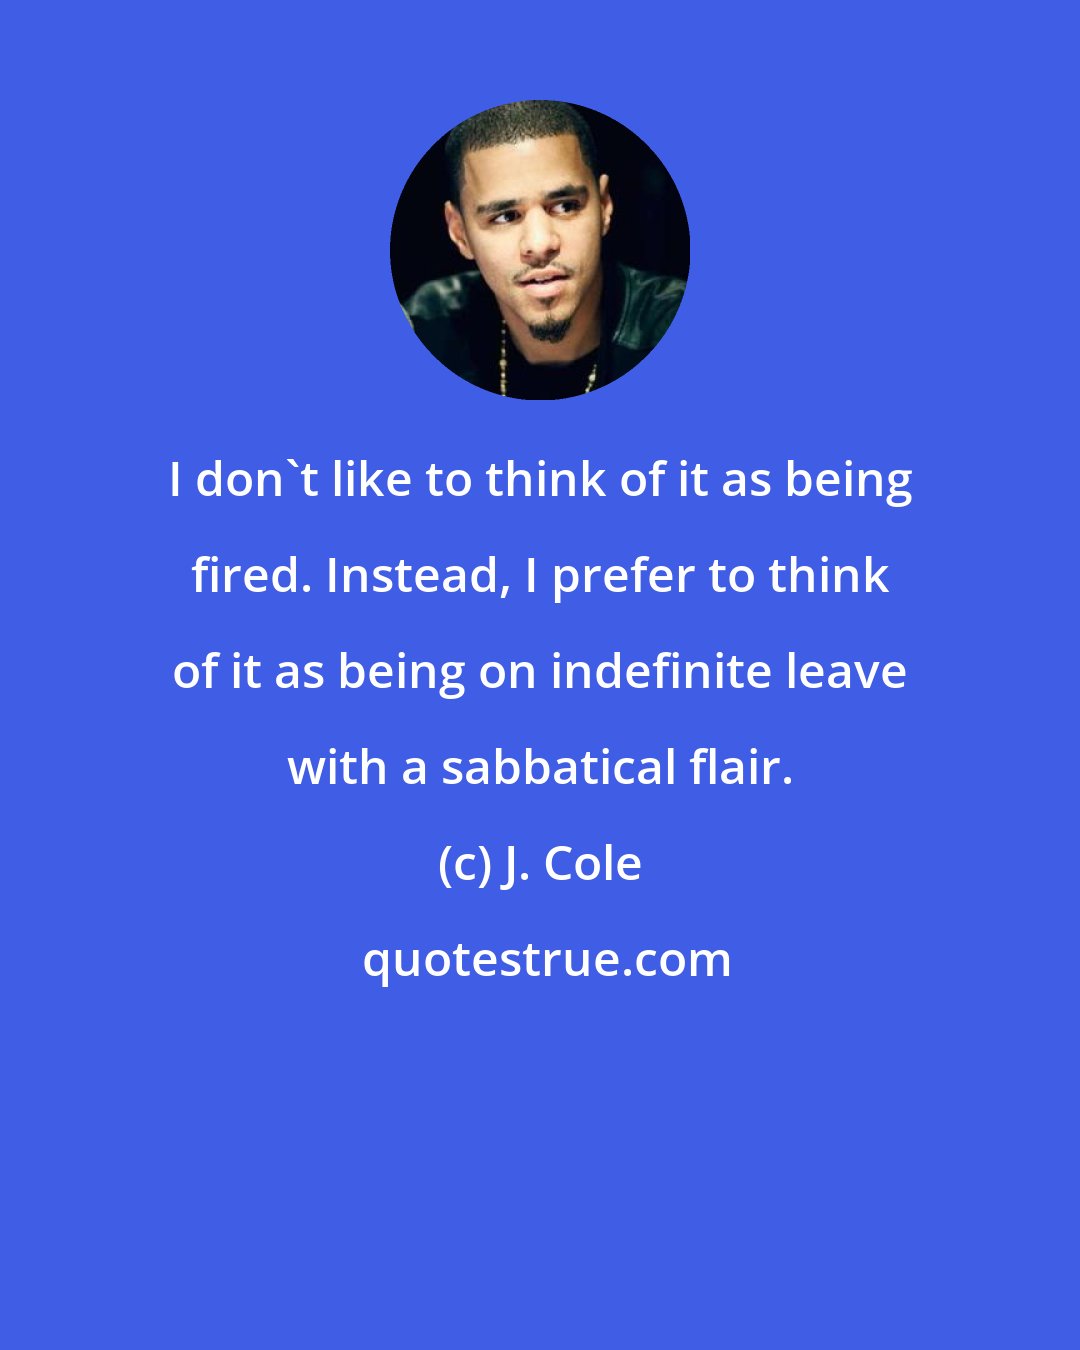 J. Cole: I don't like to think of it as being fired. Instead, I prefer to think of it as being on indefinite leave with a sabbatical flair.